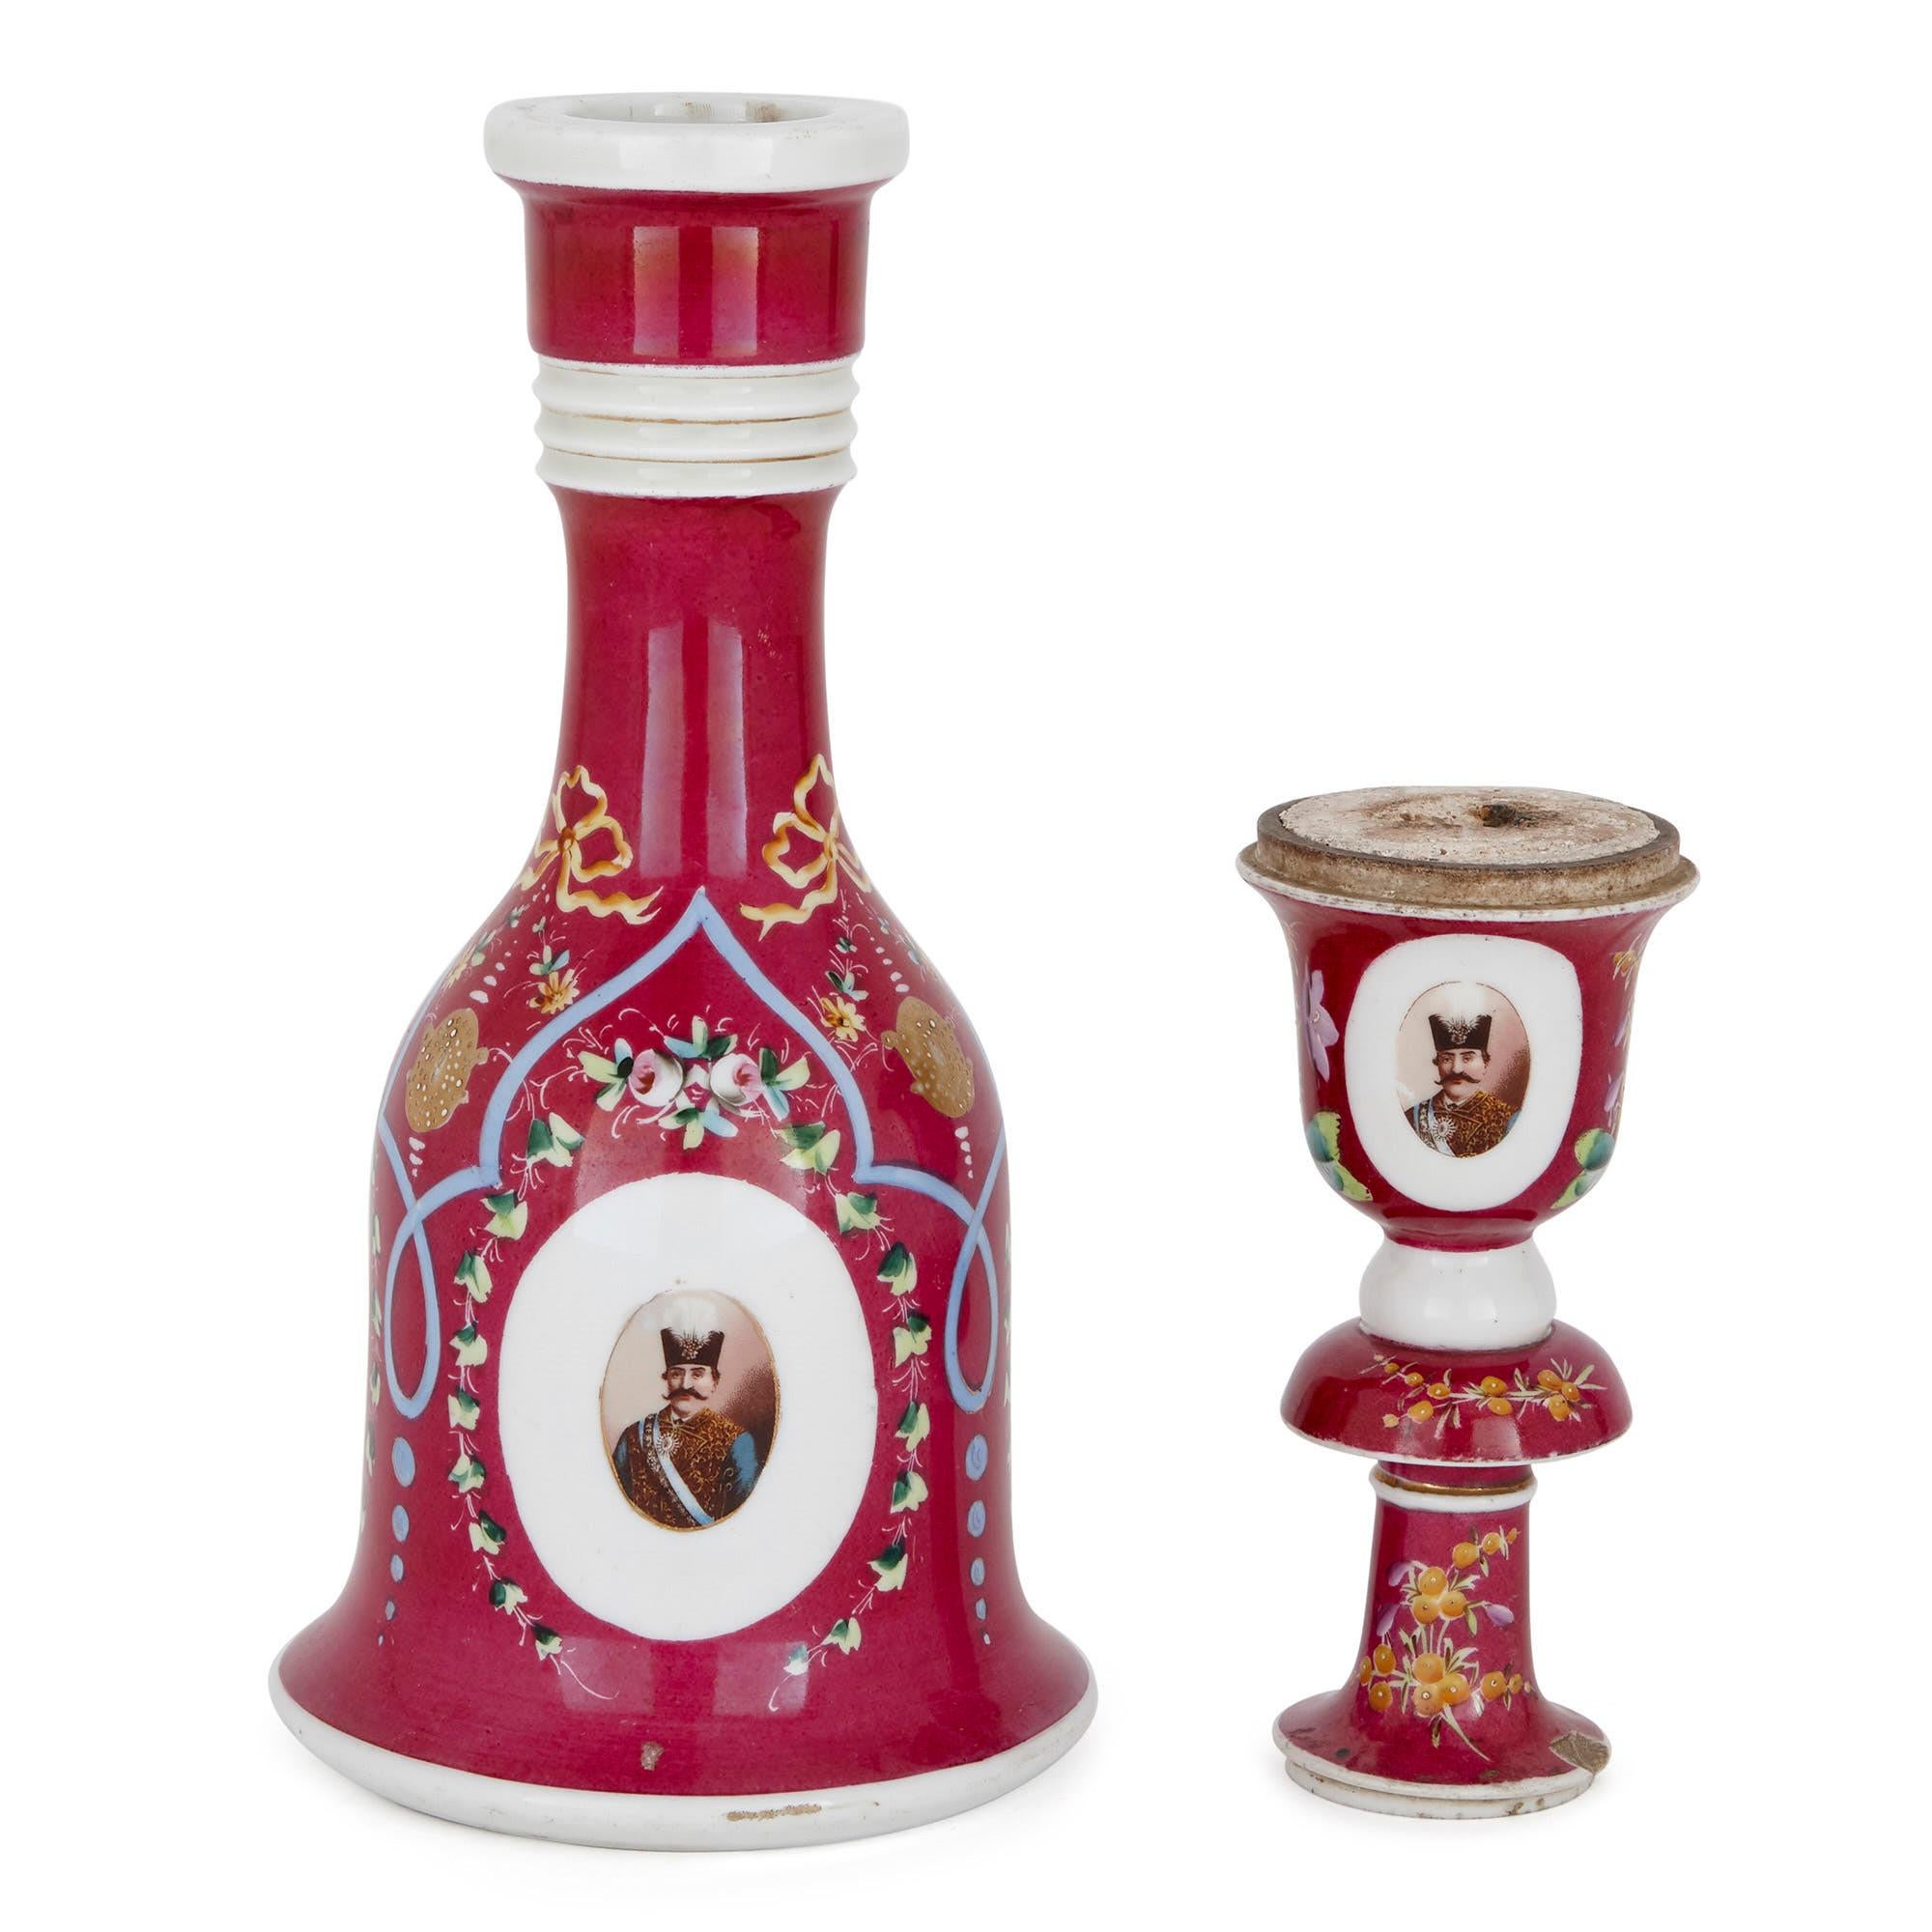 This beautiful porcelain huqqa (or hookah) is of Continental, possibly Russian, origin and was created in the late 19th Century. The item is finely painted and decorated with photo-realistic portraits of the Qajar kings of Persia, Naser al-Din Shah